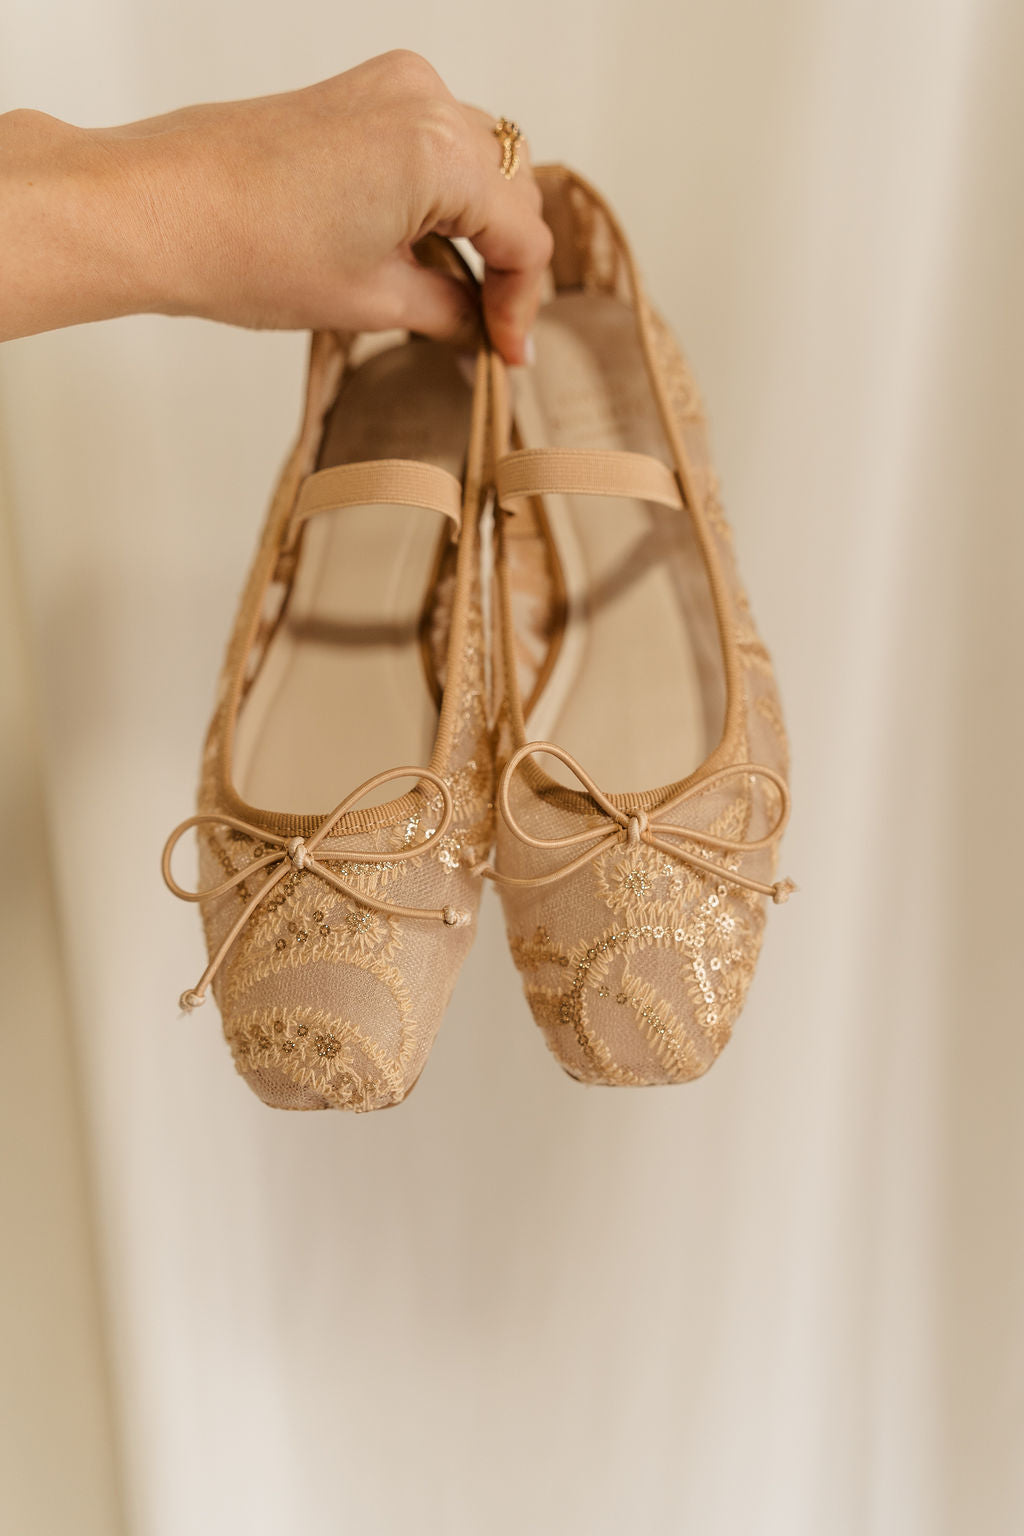 Front view of hand that is holding the Bisbee Ballet Flat in Gold that have beige mesh, ivory embroidery, gold sequins, a bow on front, and an elastic strap across the foot.